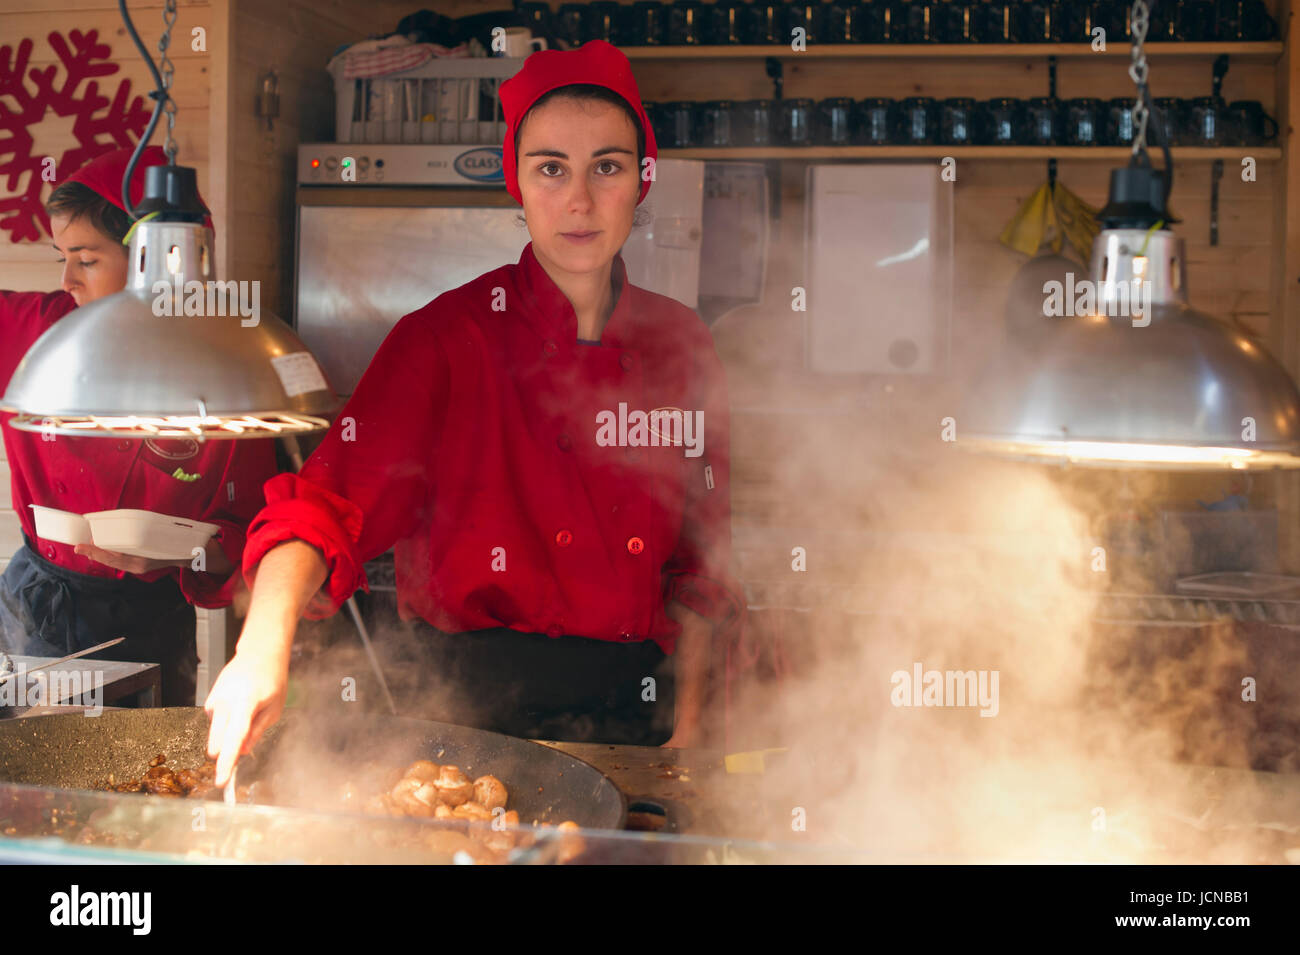 Lady cooks food at Manchester Christmas market. Stock Photo